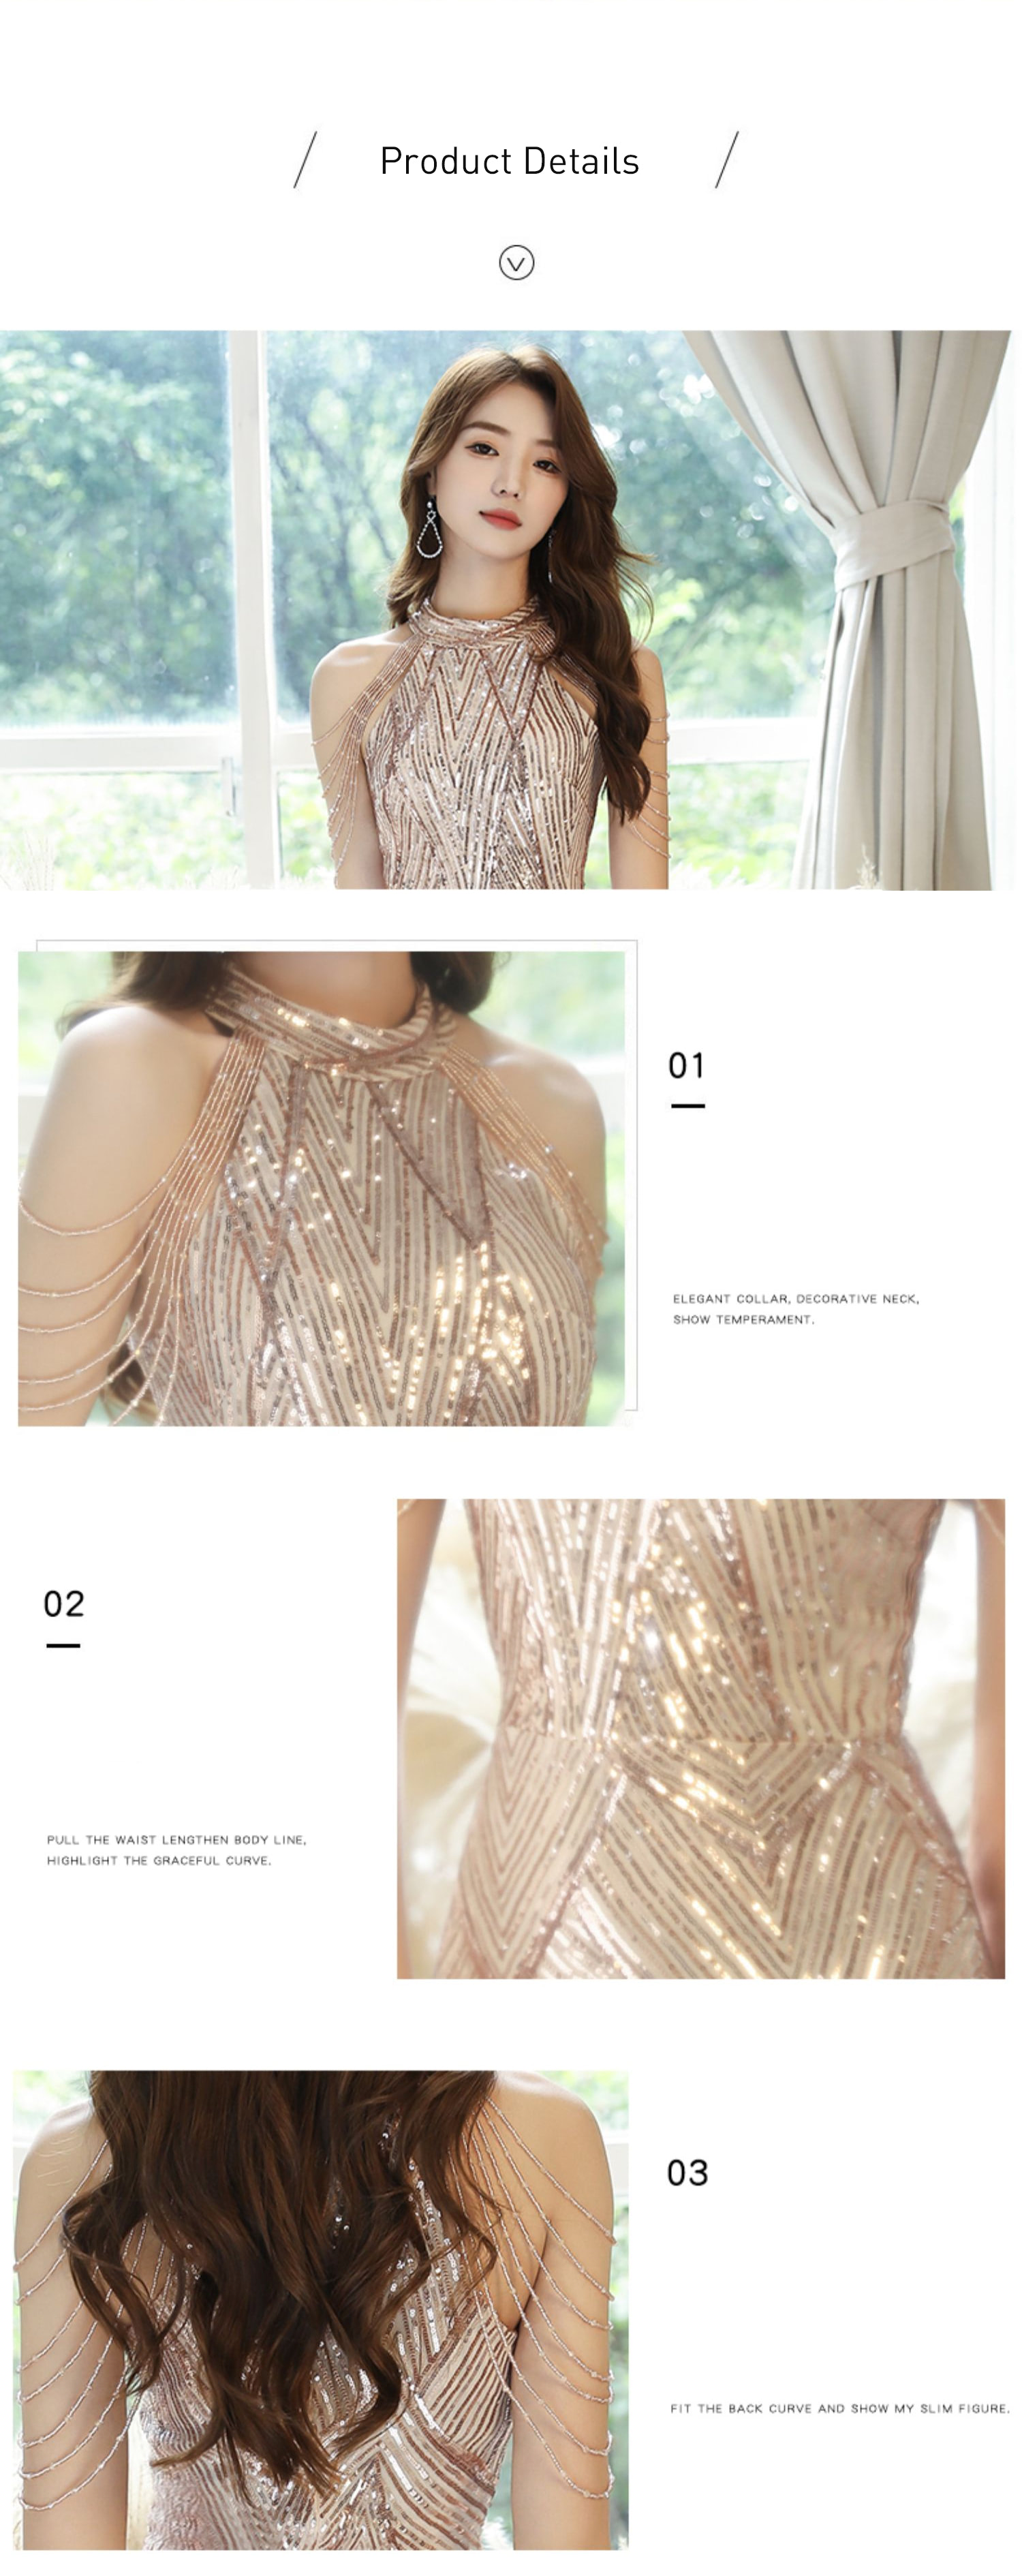 Luxury-Slim-Fit-Fishtail-Champagne-Banquet-Evening-Formal-Maxi-Dress16